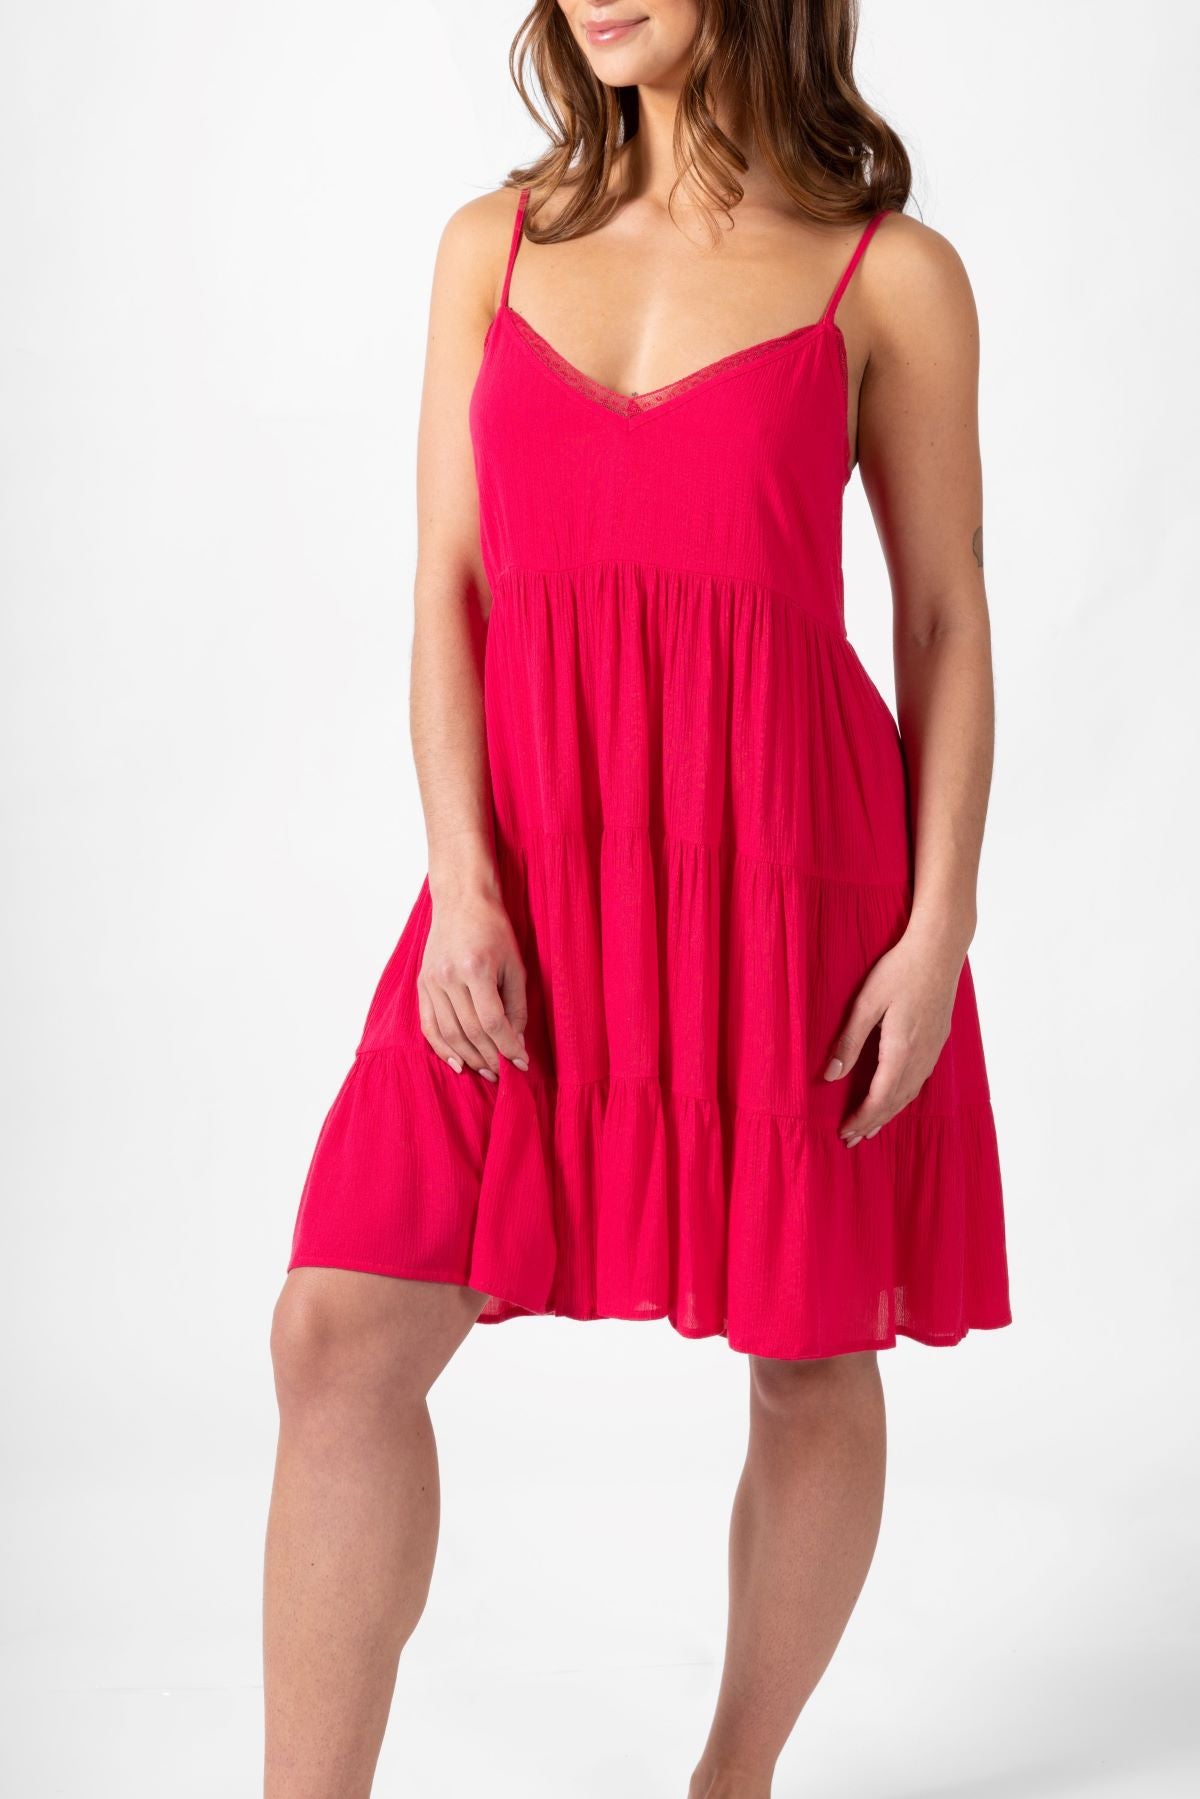 A front shot of a brunette hair woman holding the edge of her raspberry colored spaghetti strap summer beach dress. Brunette model facing front side close up, wearing Raspberry Pink Miami Tiered Strappy Mini Dress. The dress features adjustable straps, a flirty tiered empire silhouette, and is crafted from lightweight rayon for a comfortable feel. It includes a smocked back, is lined in white, and has pockets, making it both stylish and practical. Koy Resort affordable vacation, cruise, and resort-wear.